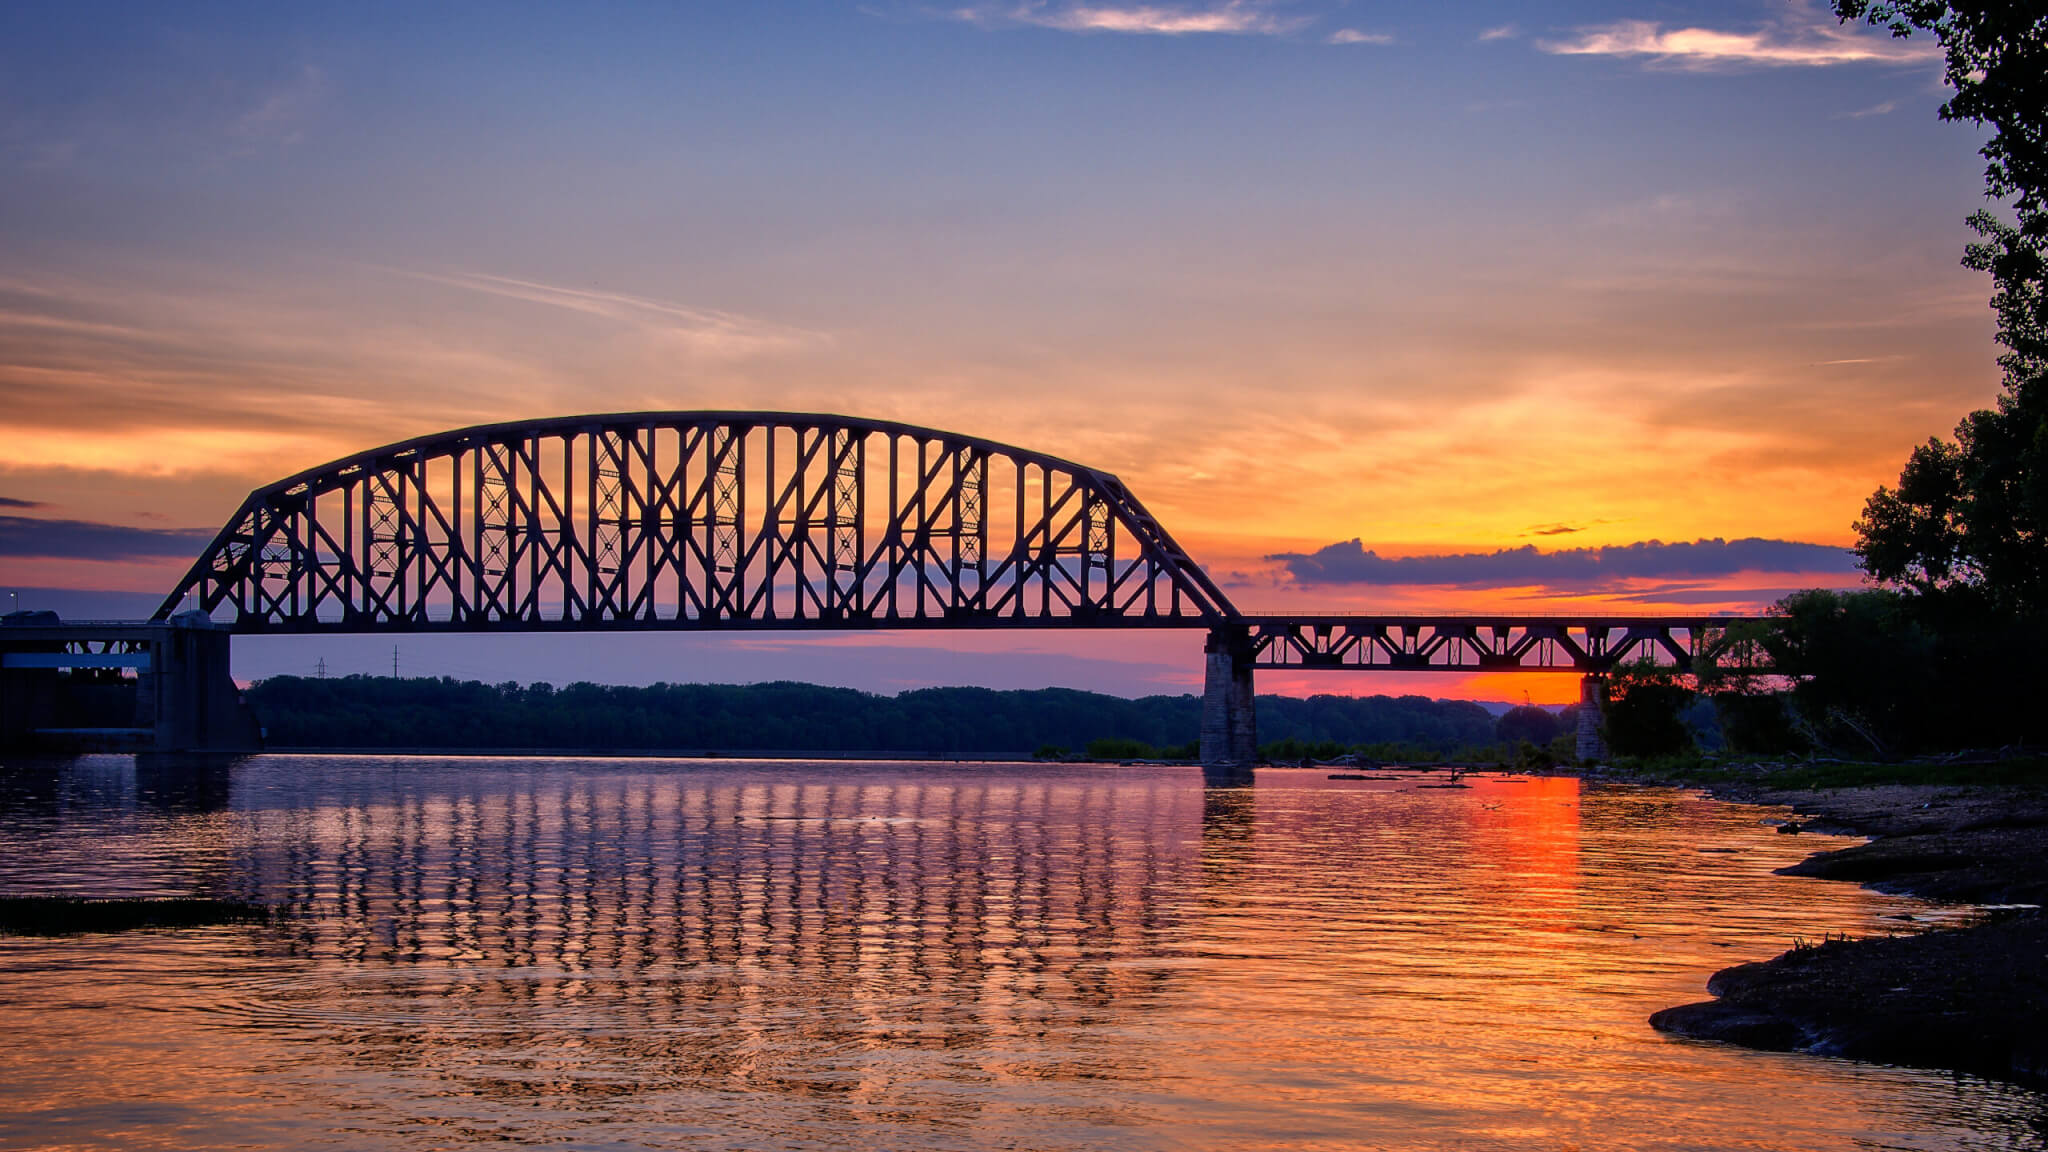 The Historic Fourteenth Street Bridge over the Ohio river, connecting Kentucky and Indiana